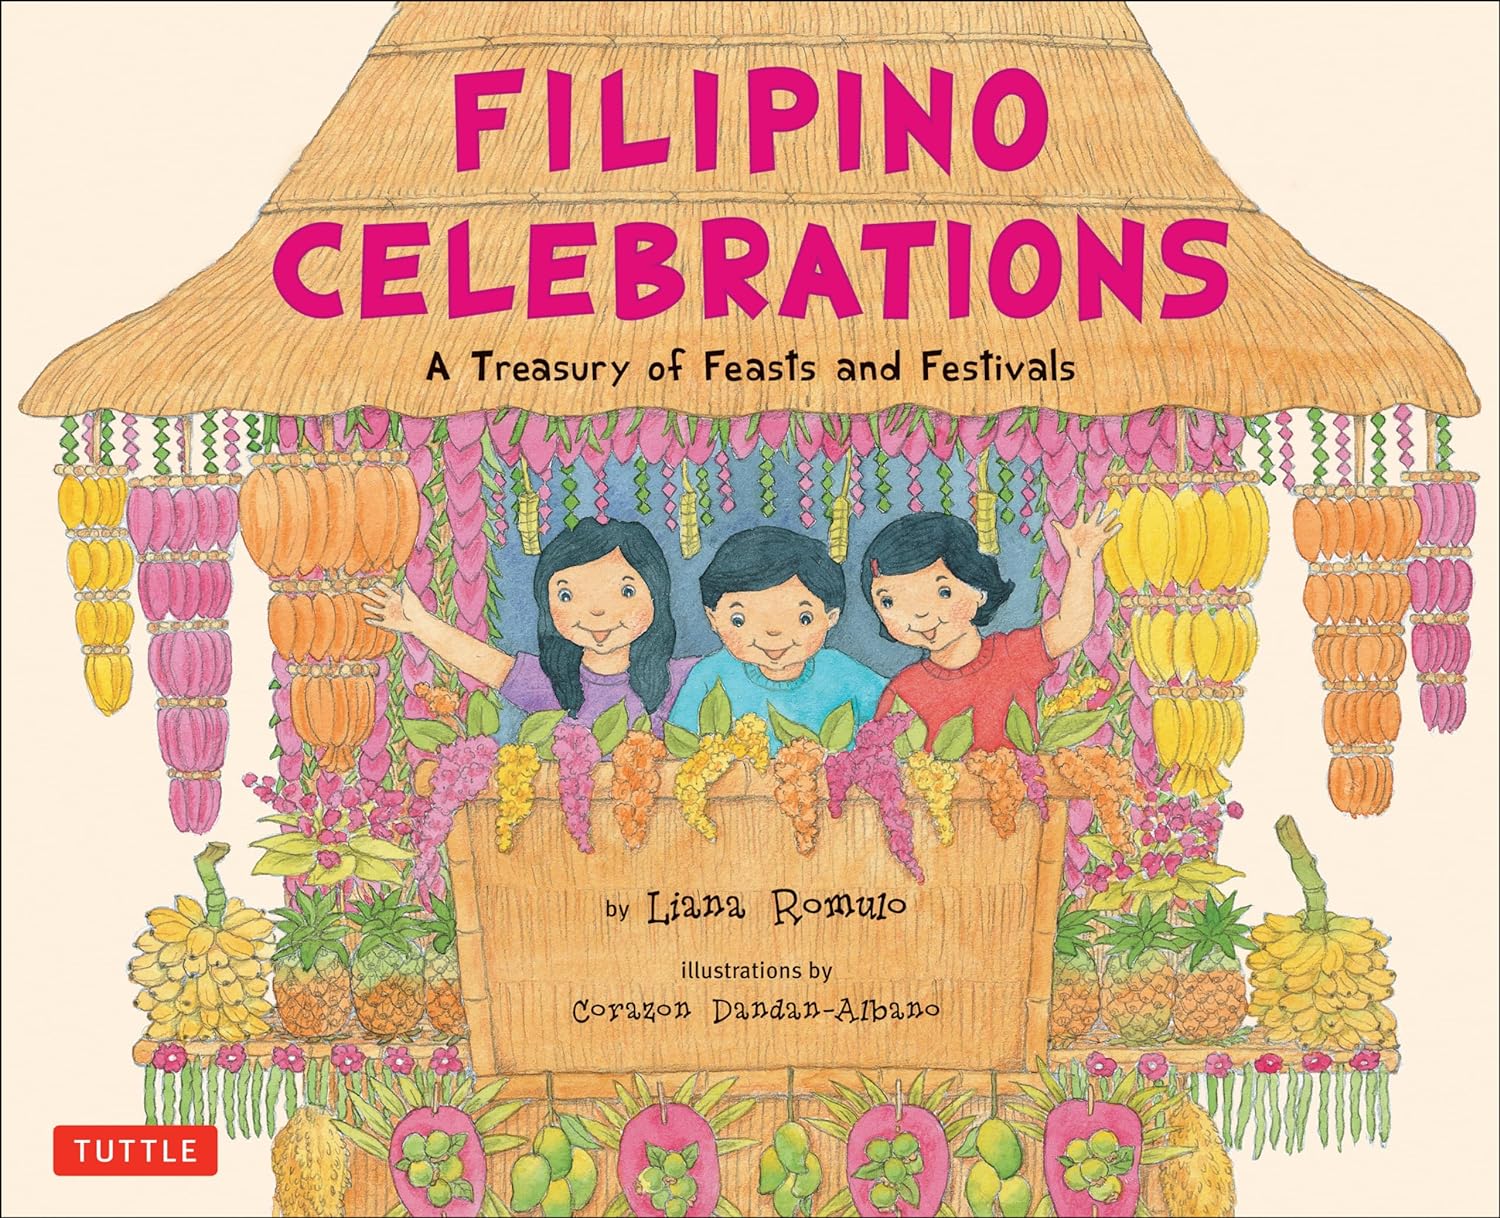 Filipino Celebrations: A Treasury of Feasts and Festivals - Asian American picture book